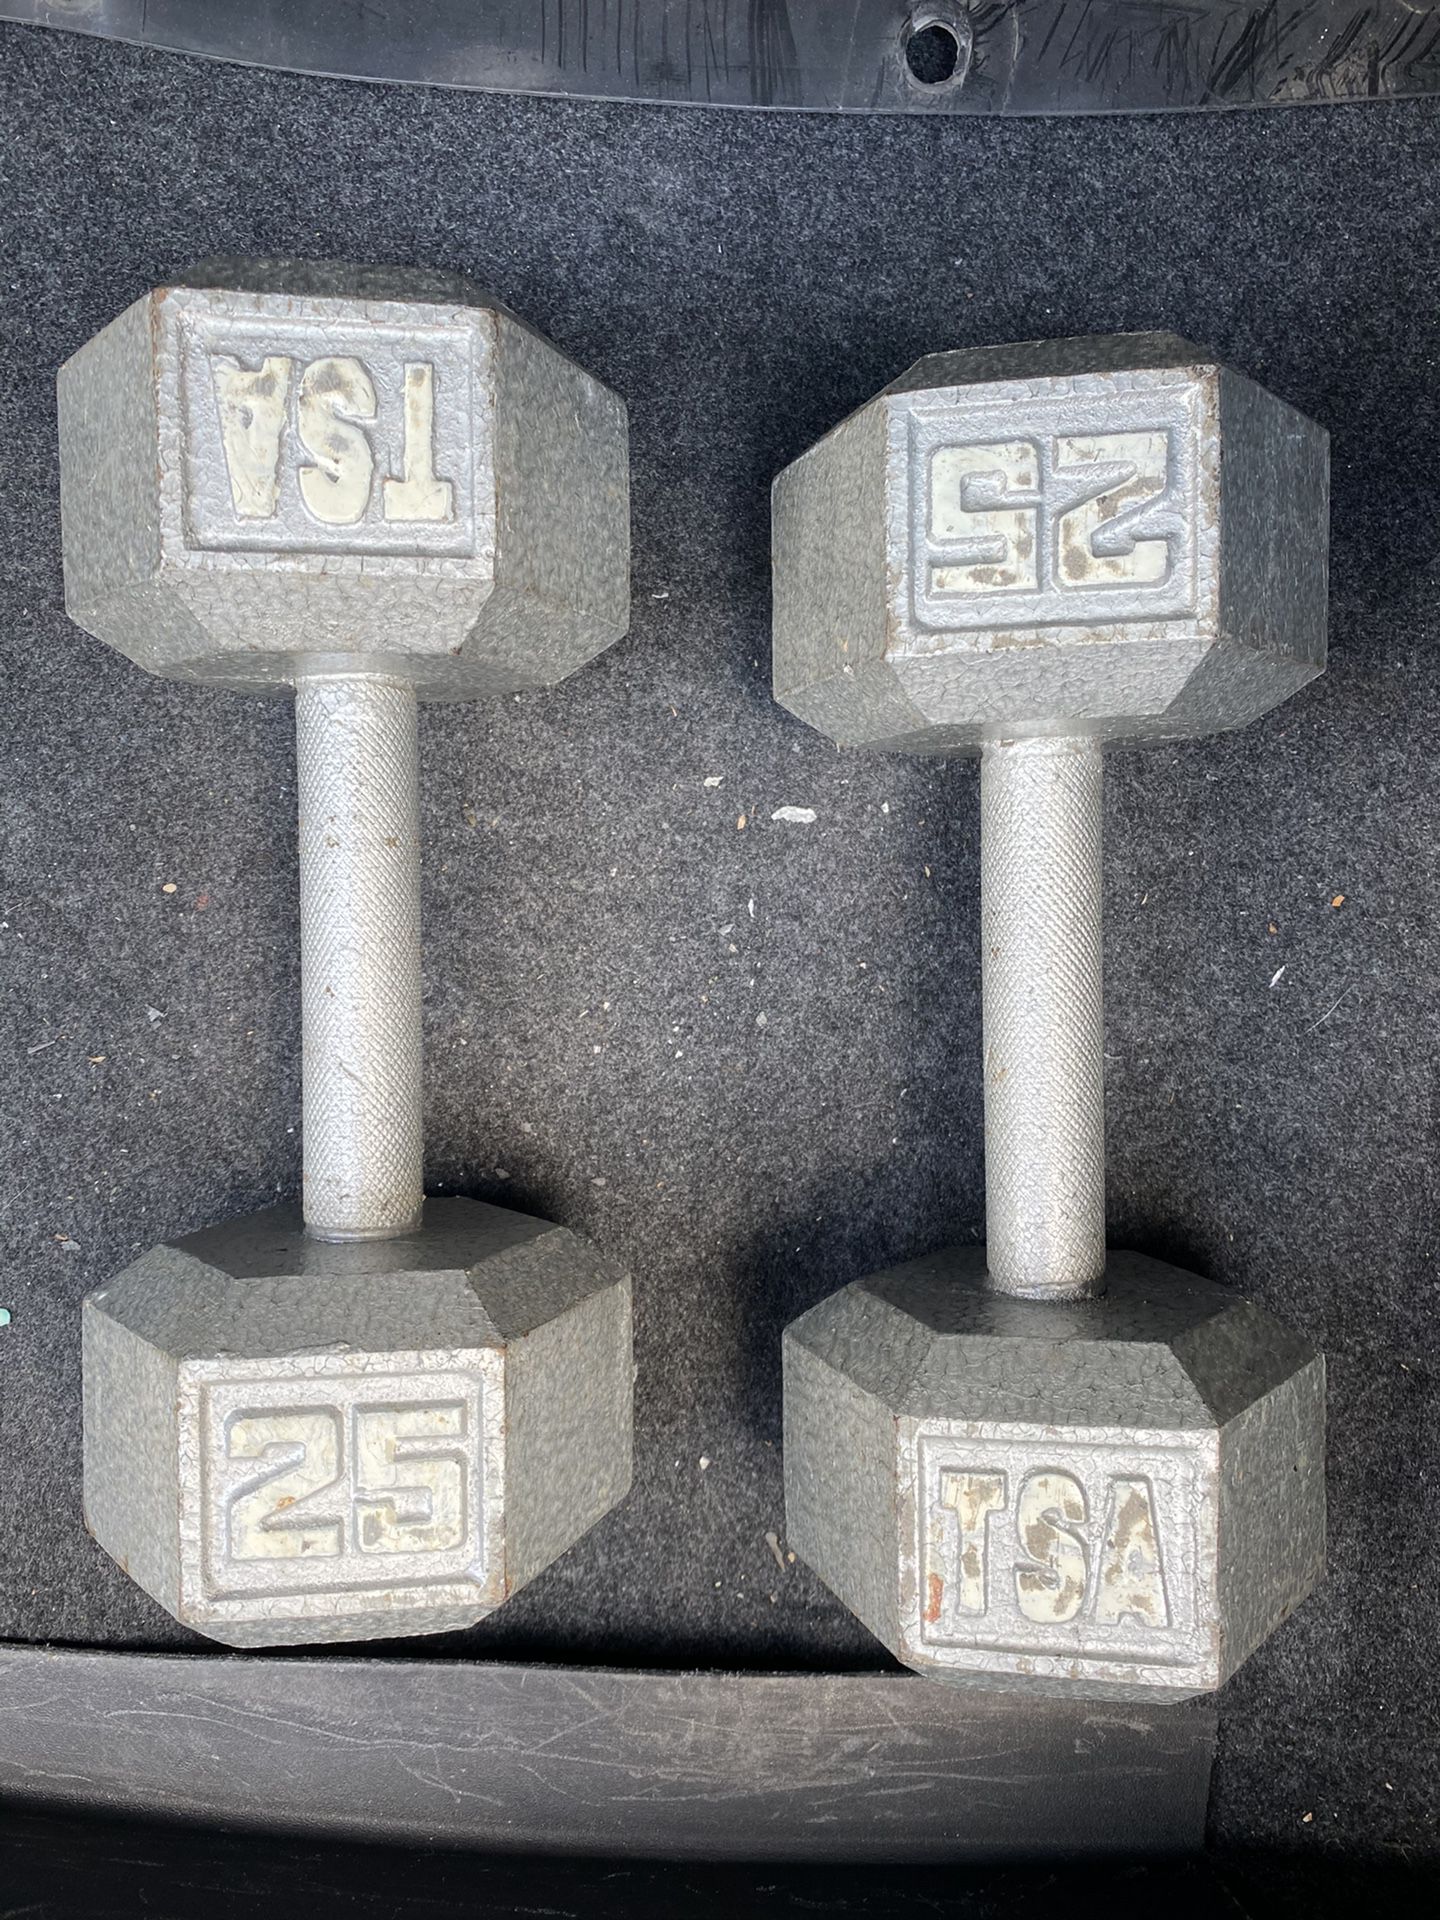 Two 25 Pound Dumbbells - $85